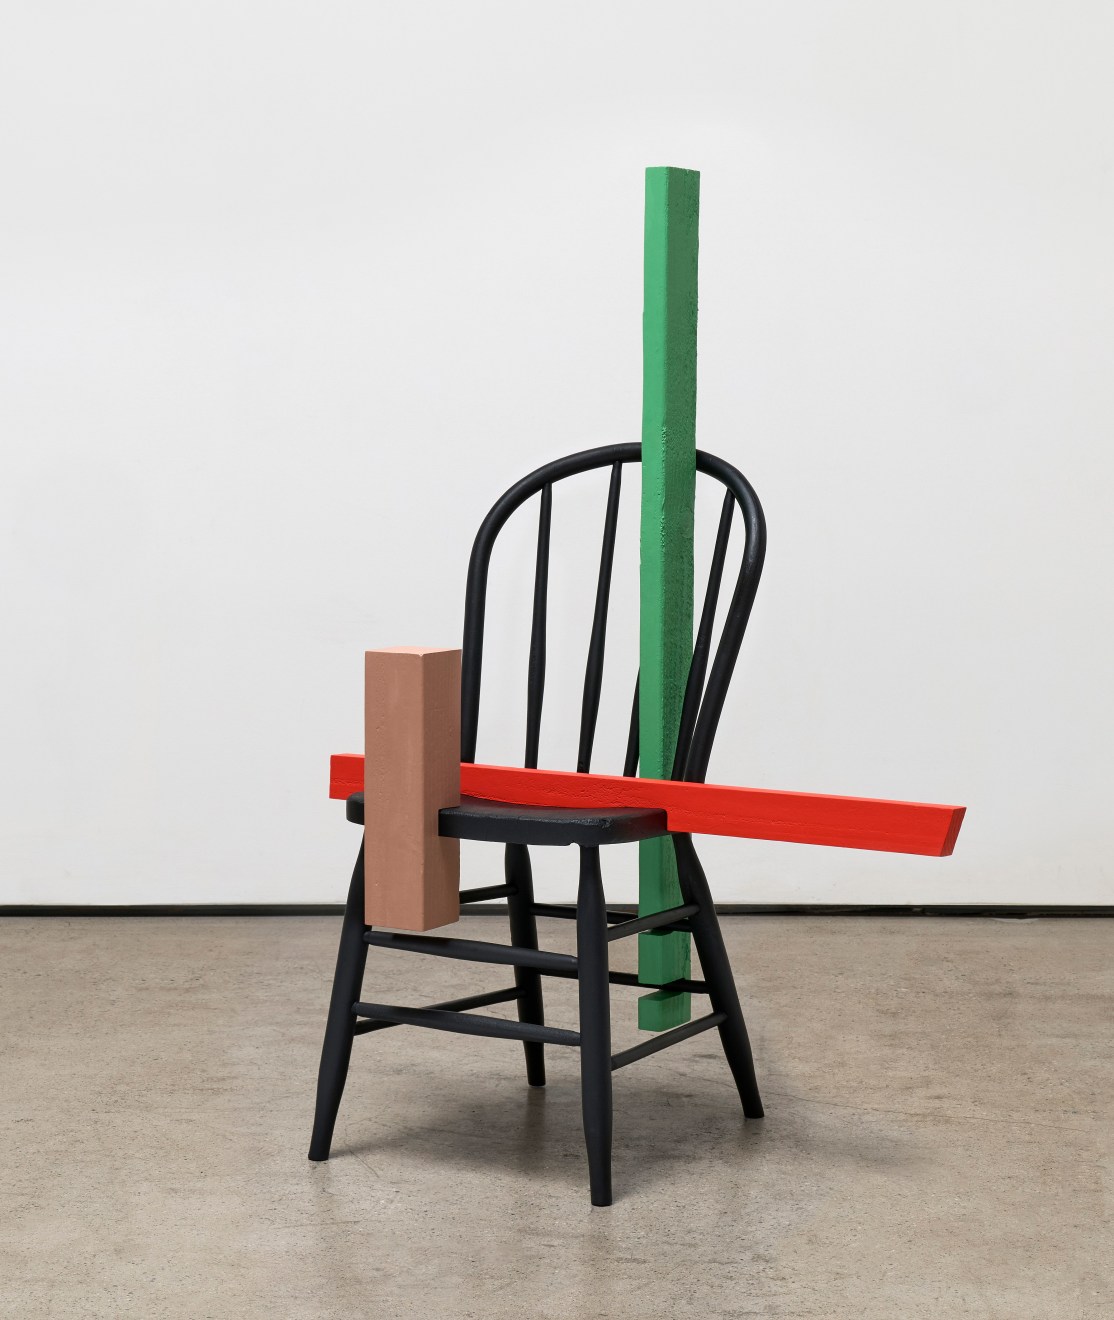 Ricky Swallow, Chair Composition #2, 2024